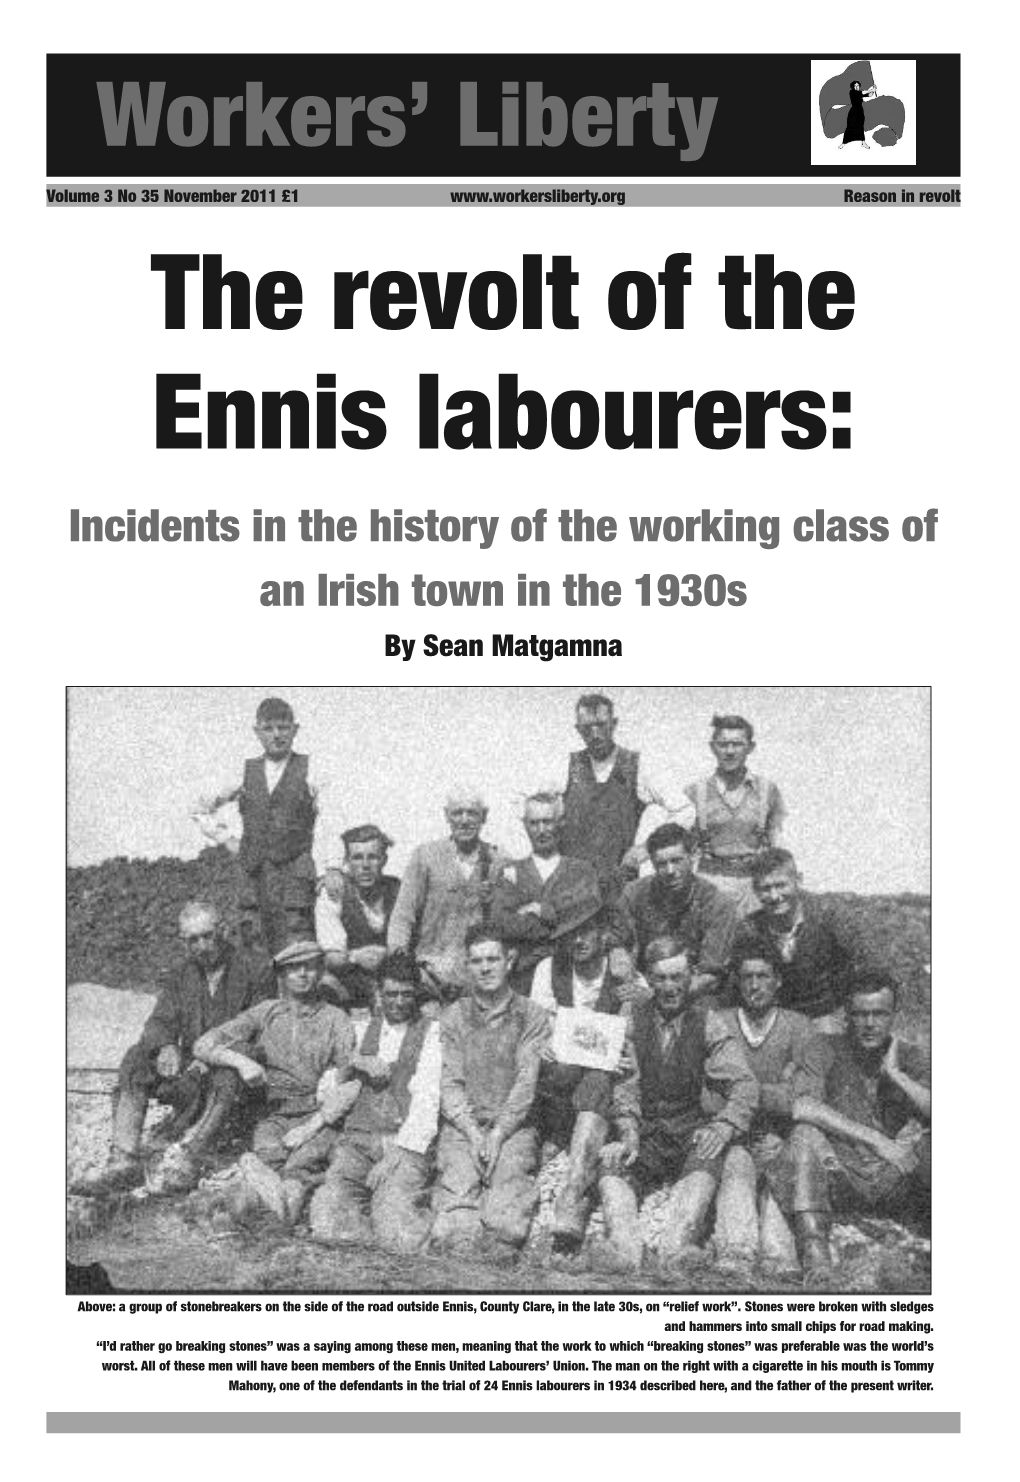 Incidents in the History of the Working Class of an Irish Town in the 1930S by Sean Matgamna